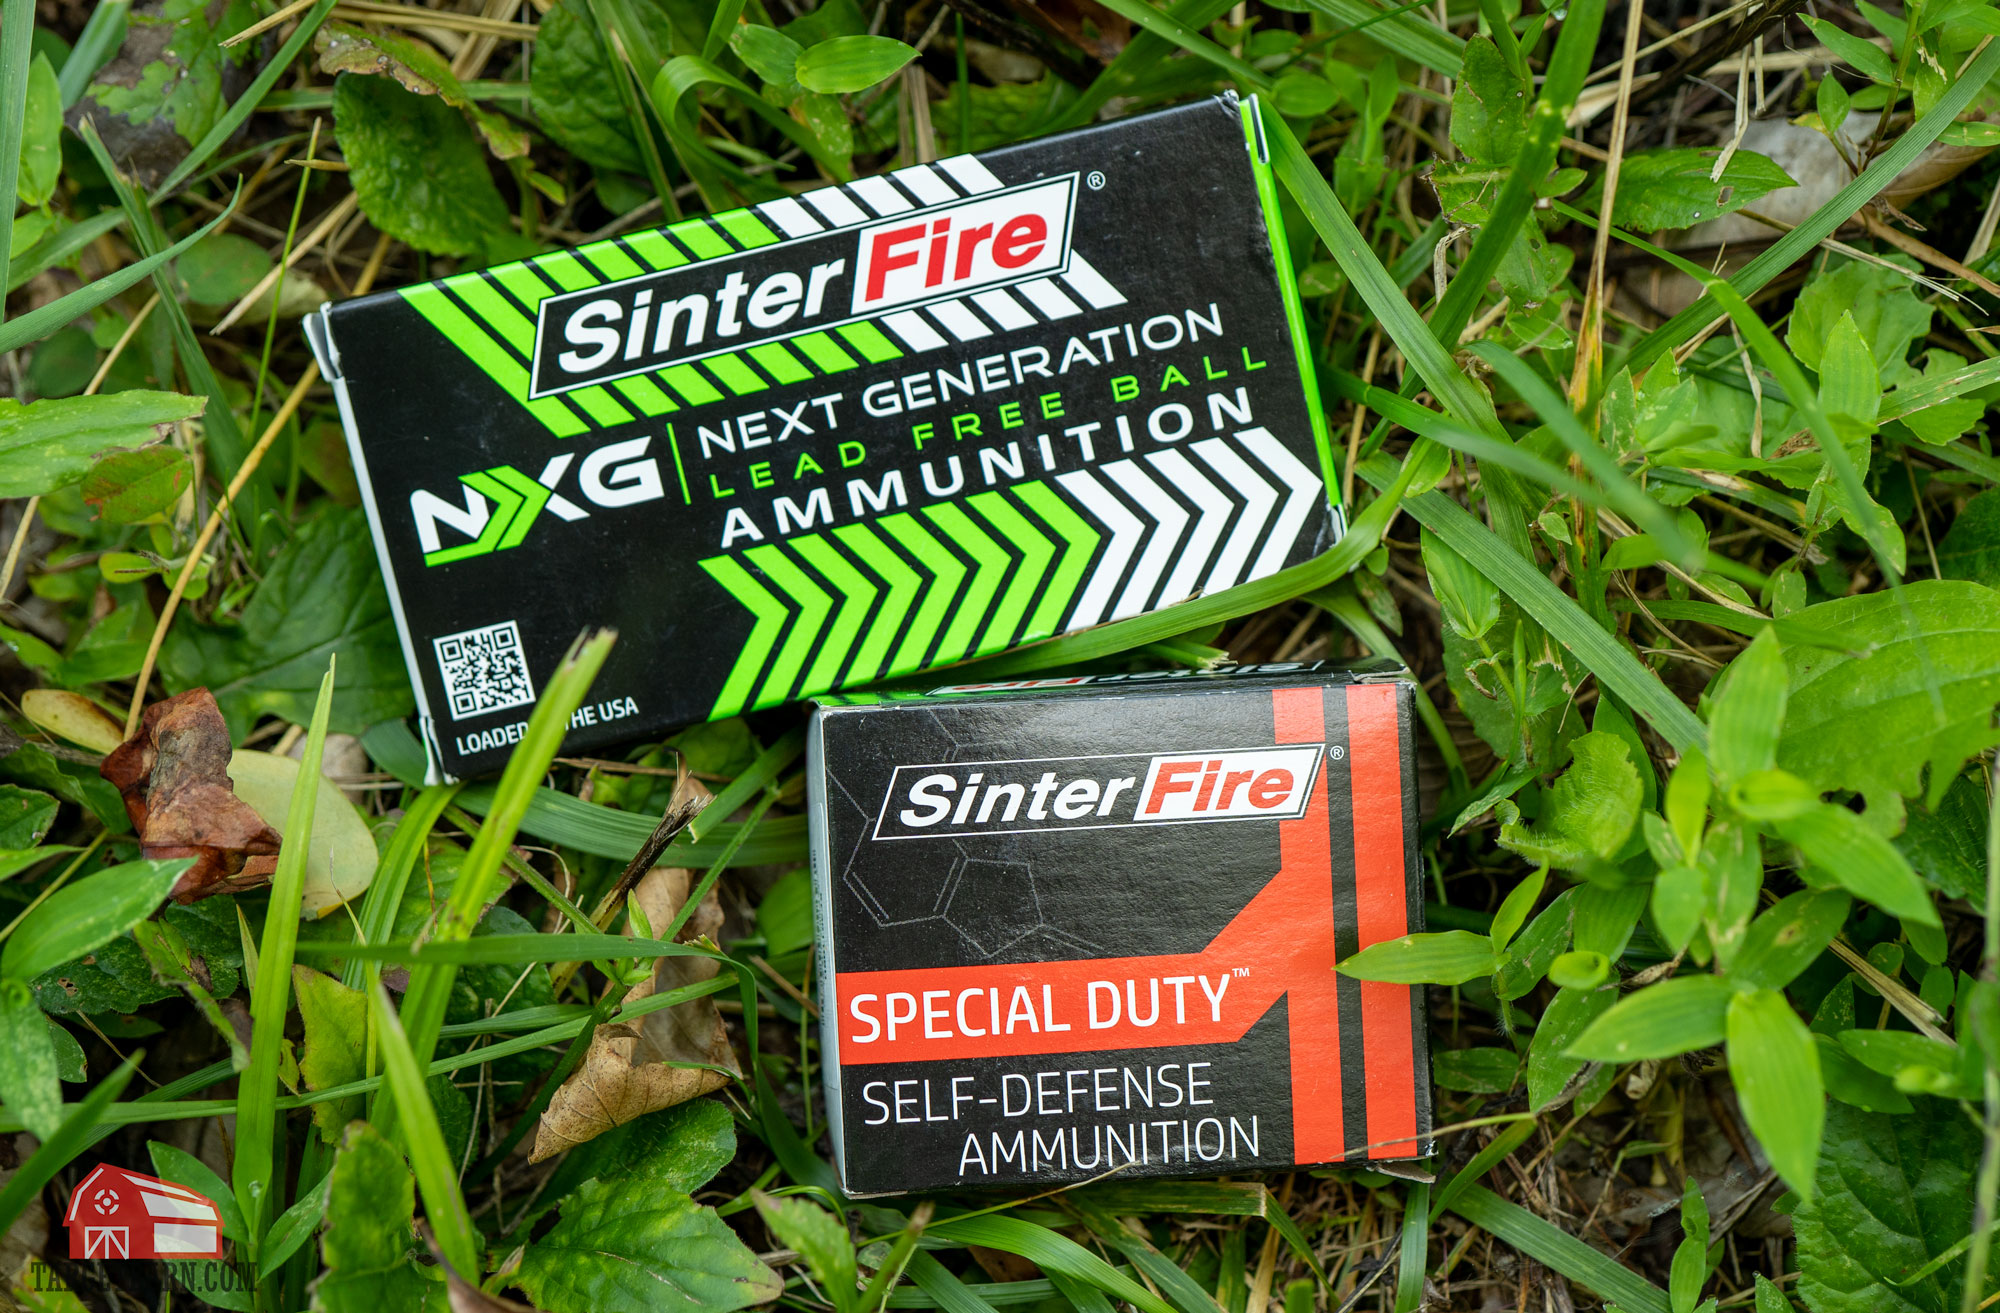 sinterfire frangible training ammo and sinterfire special duty frangible self defense ammo